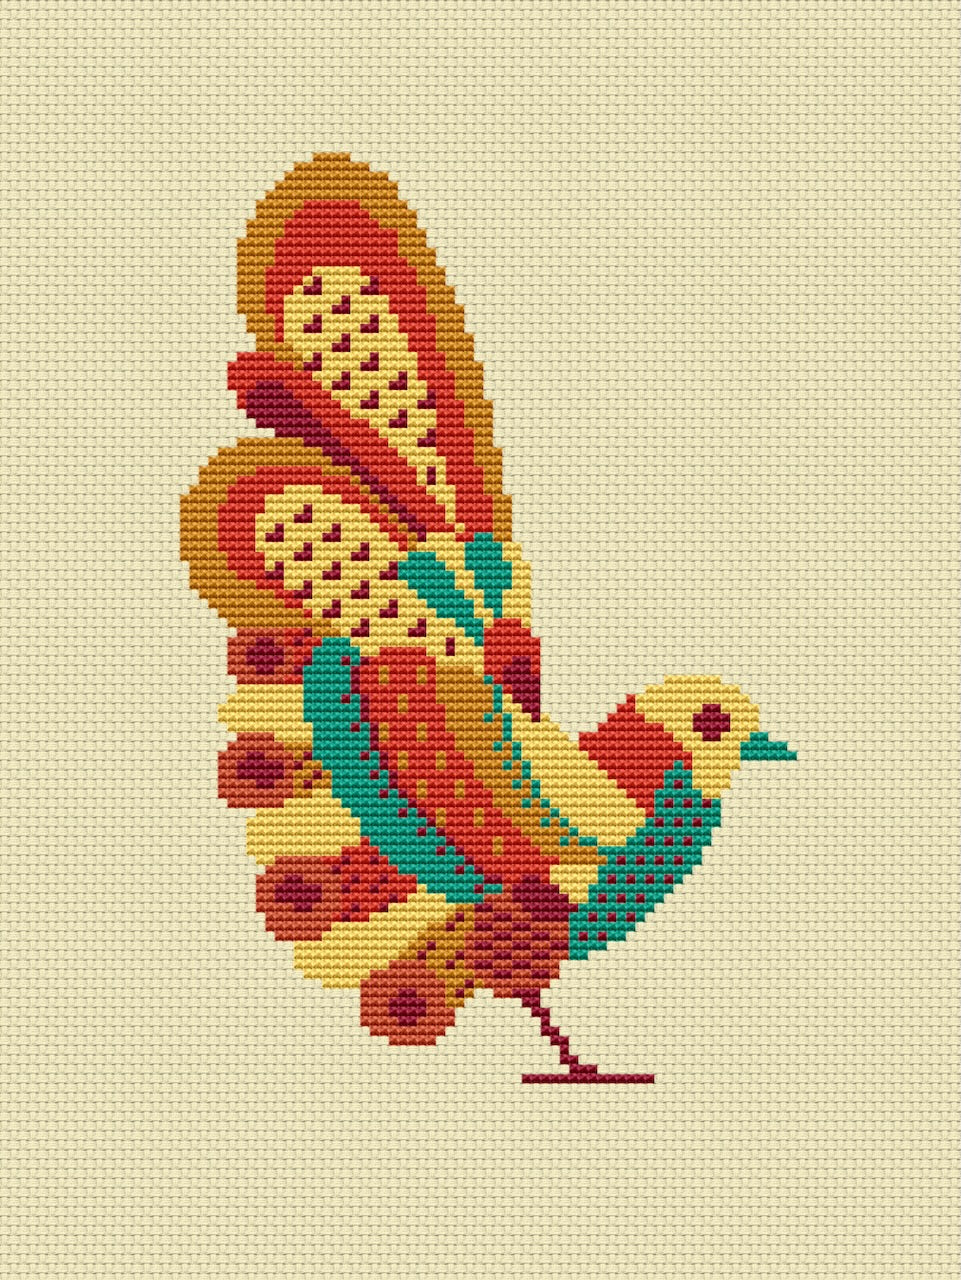 gold bird embroidery pattern